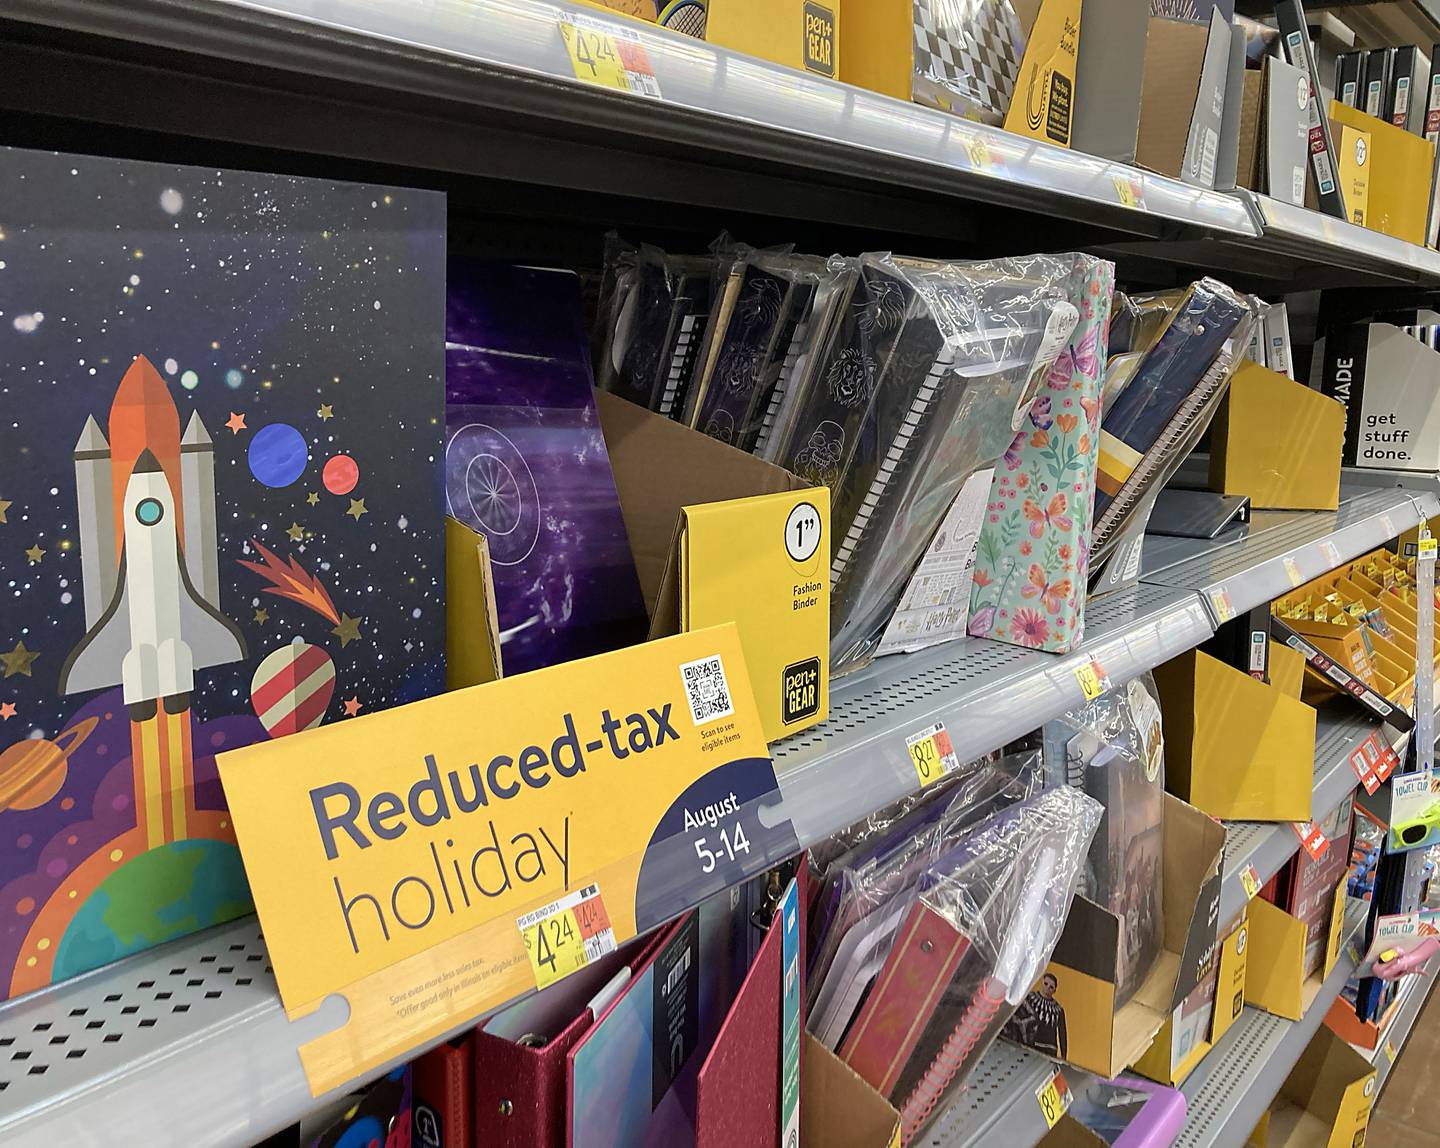 School supplies for sale on Monday, August 8, 2022, at Walmart in Woodstock during the school supplies sale tax holiday. The sales tax holiday on eligible school supplies runs through August 14.